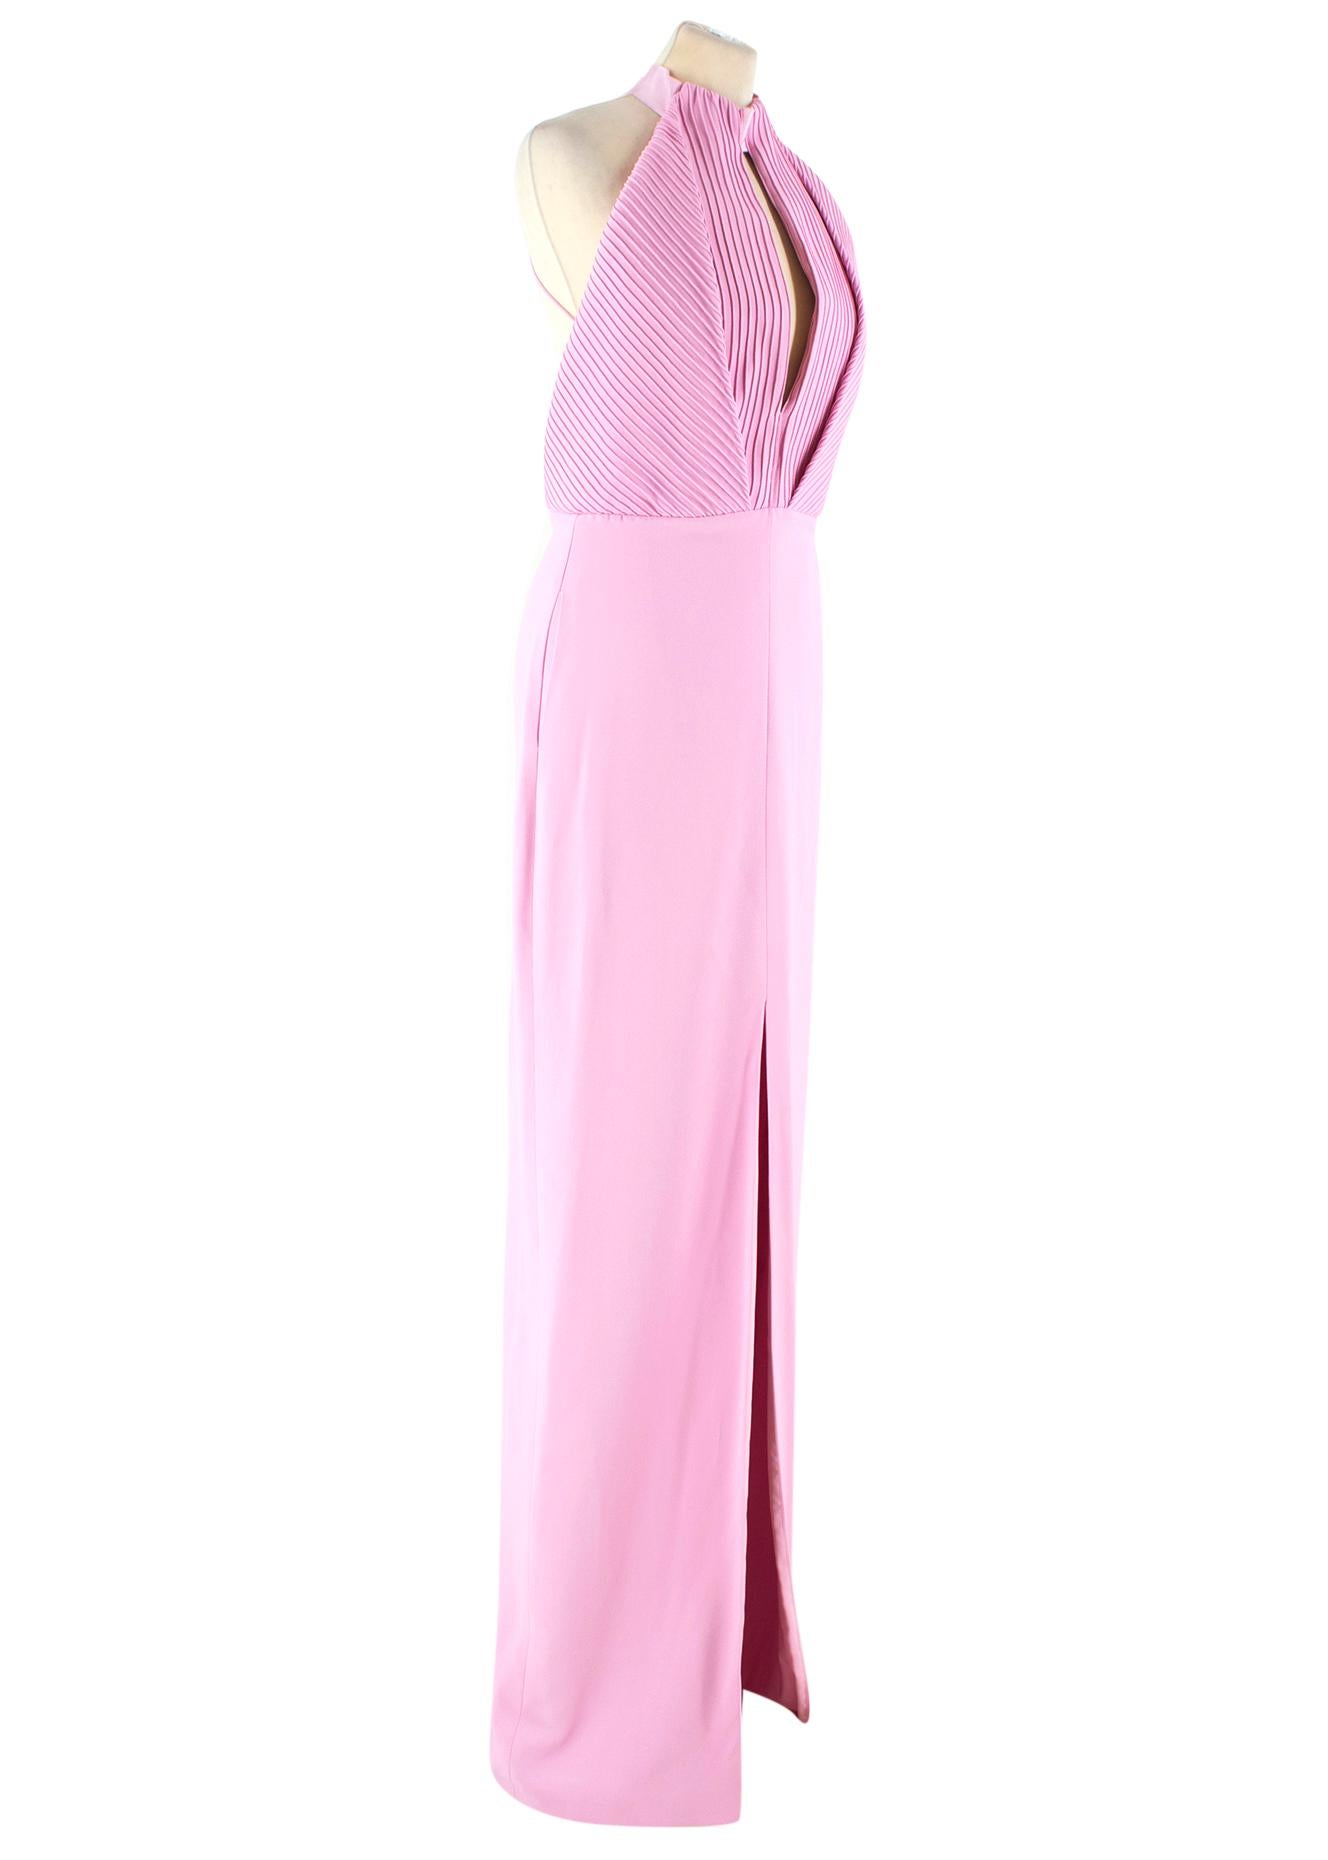  Brandon Maxwell pintuck-bodice crepe gown

-Pink gown with slit
-Ribbed bodice with keyhole cut out
-Open back
-Zip and hook and eye closure
-Two front pockets
-Please note the belt is not included.

Please note, these items are pre-owned and may